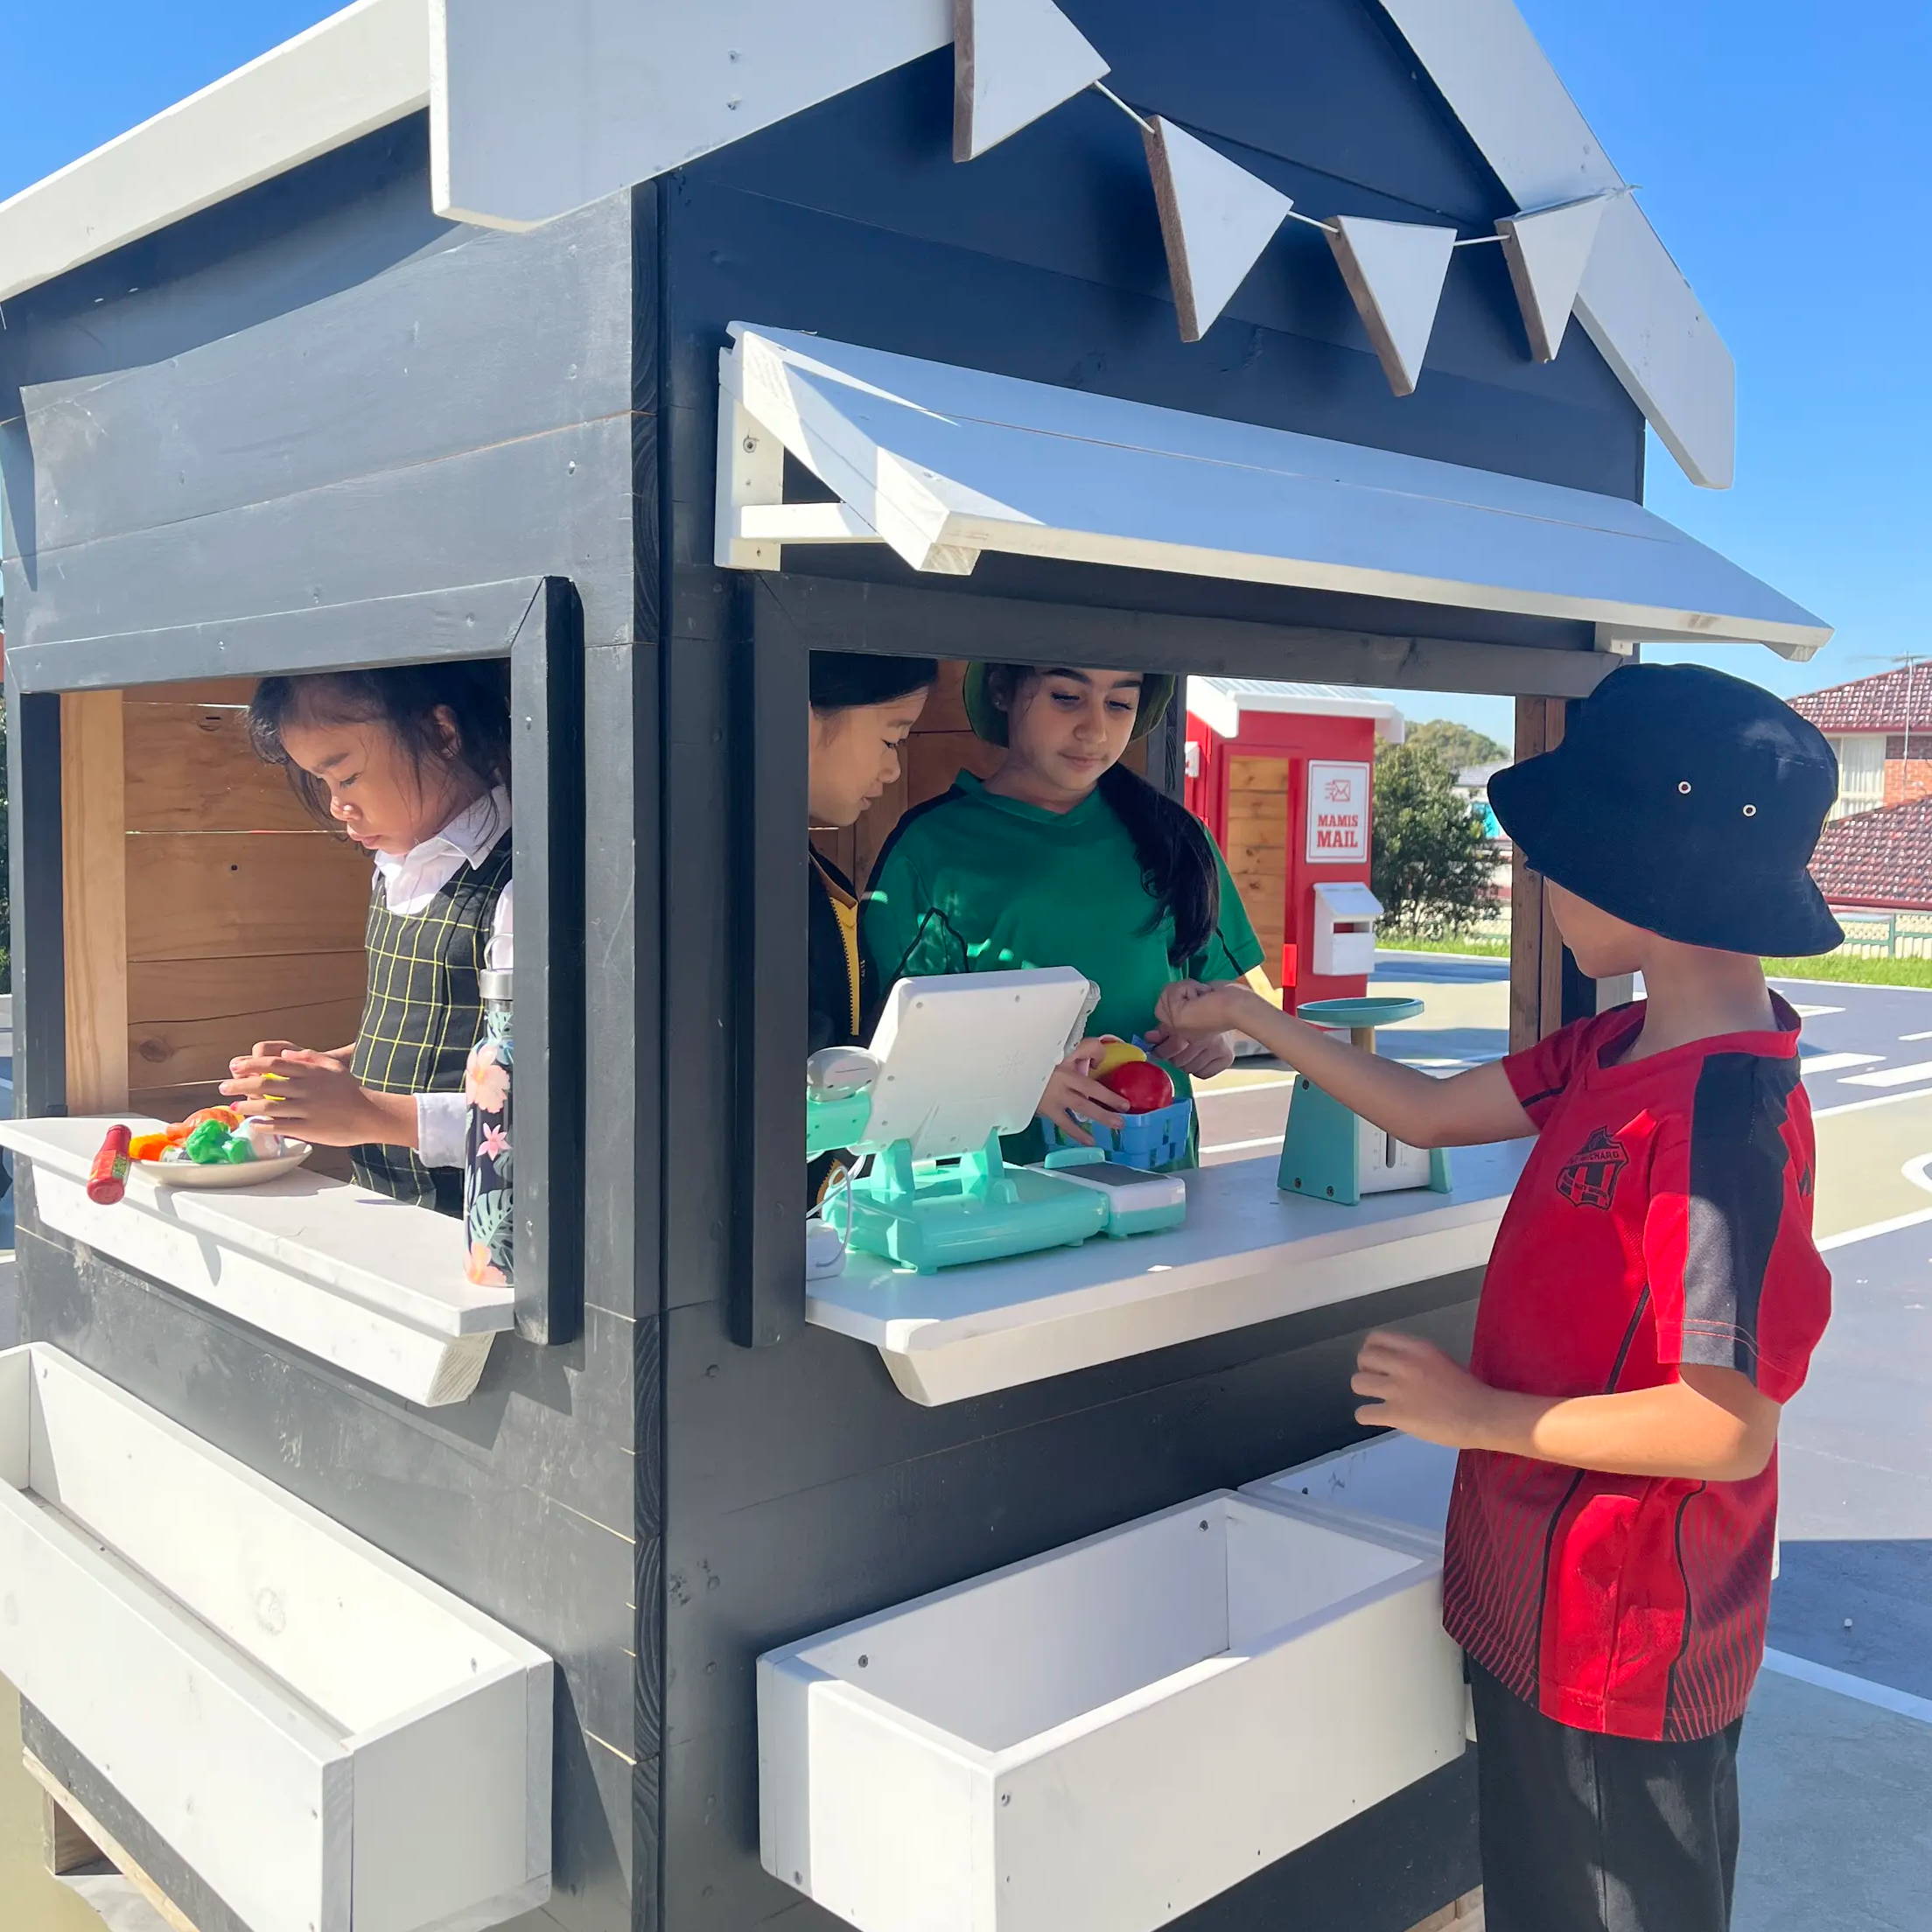 Children engaging in an imaginative play with a painted cubby house.